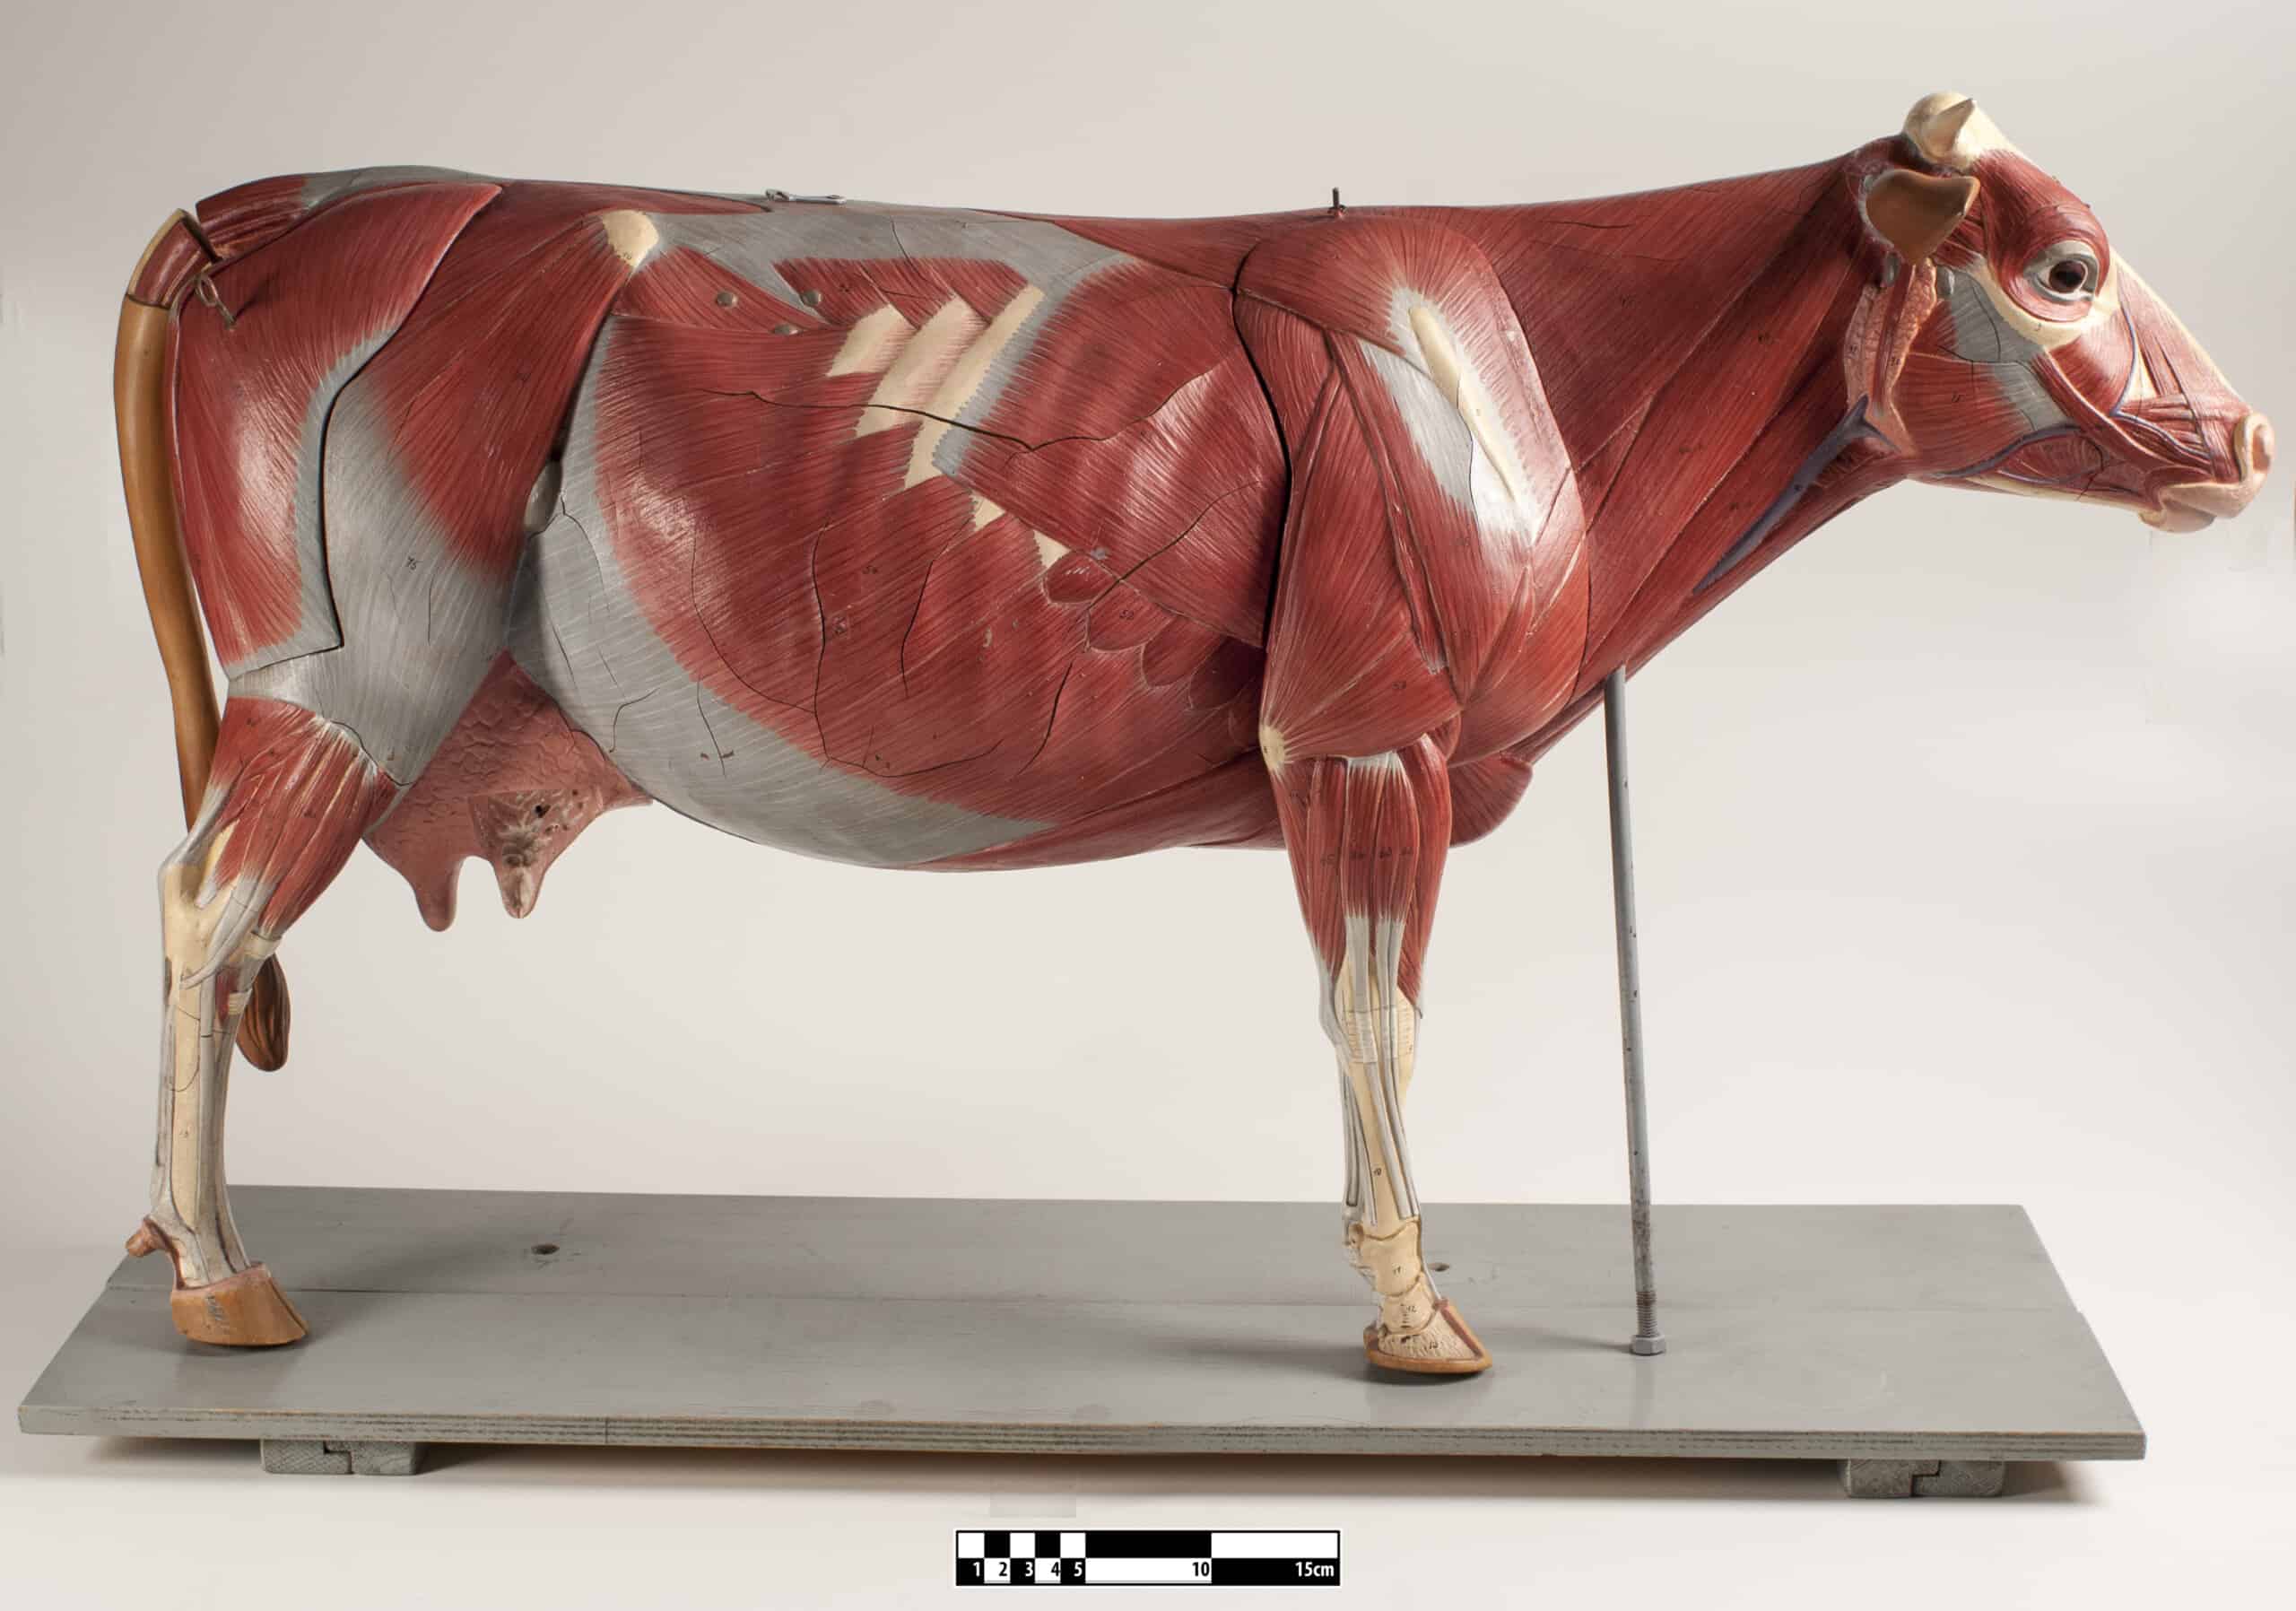 Photo of a Didactic model of a bovine muscular system